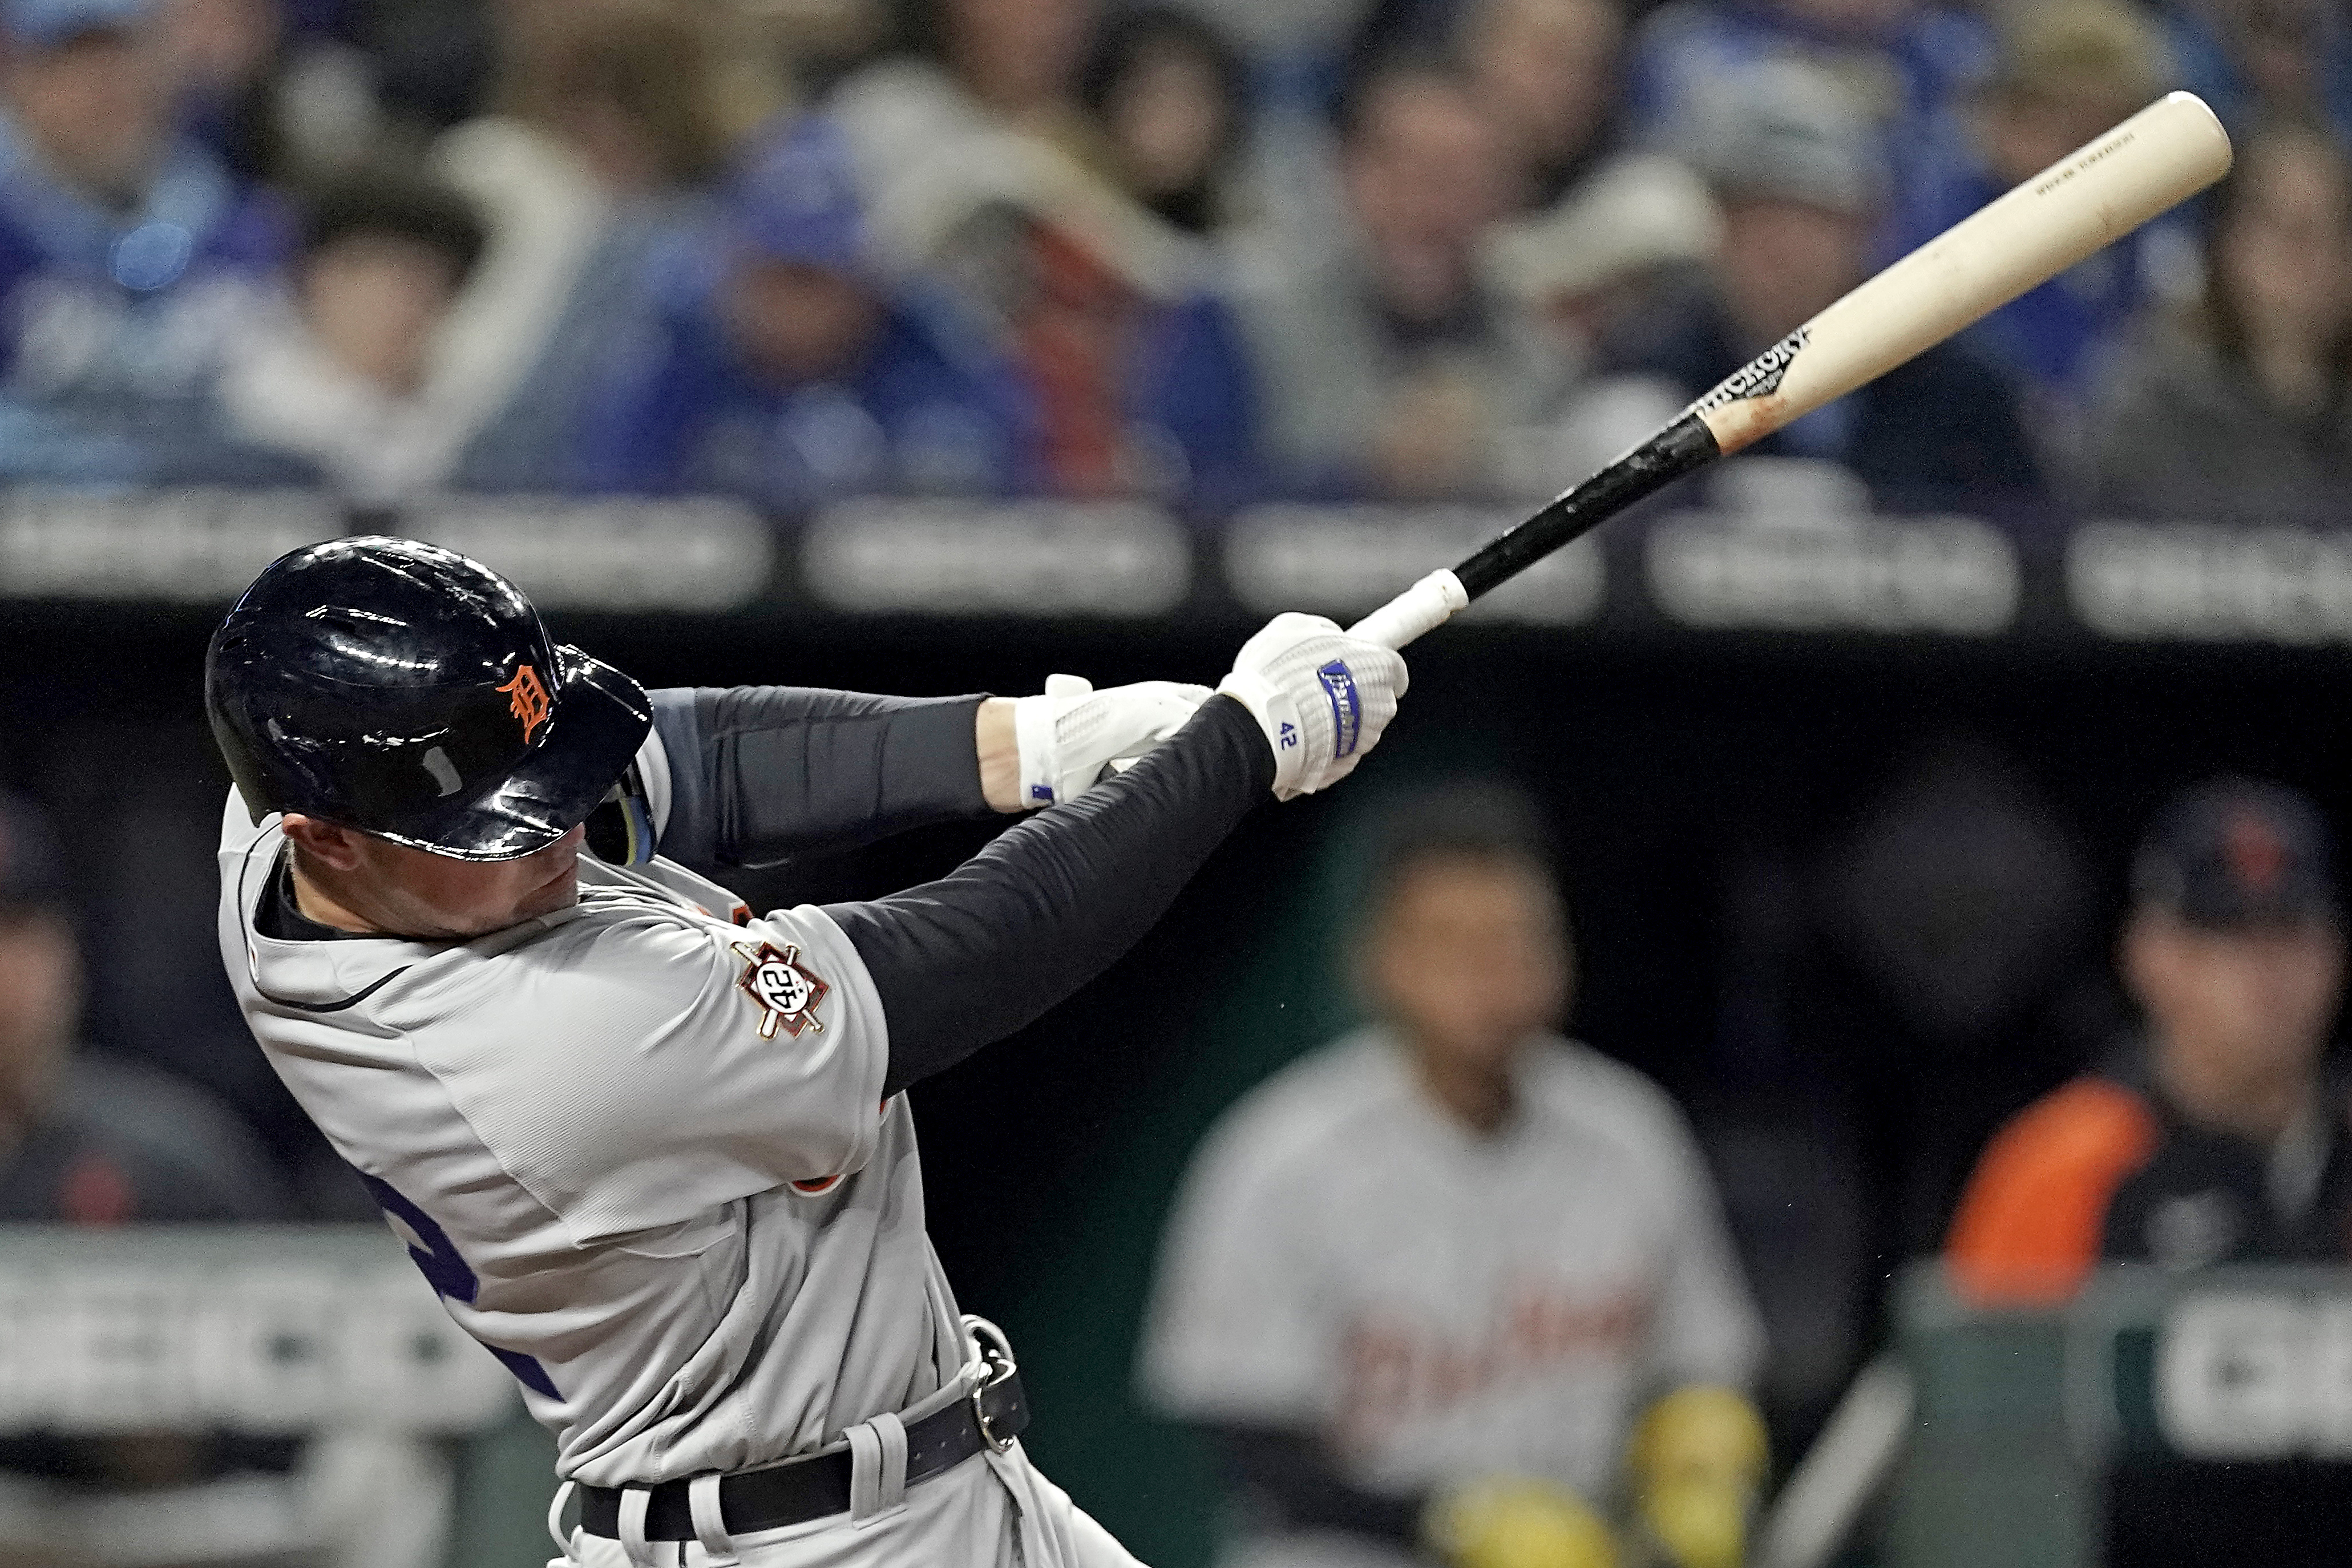 Torkelson homers twice against the Twins again, leading the Tigers